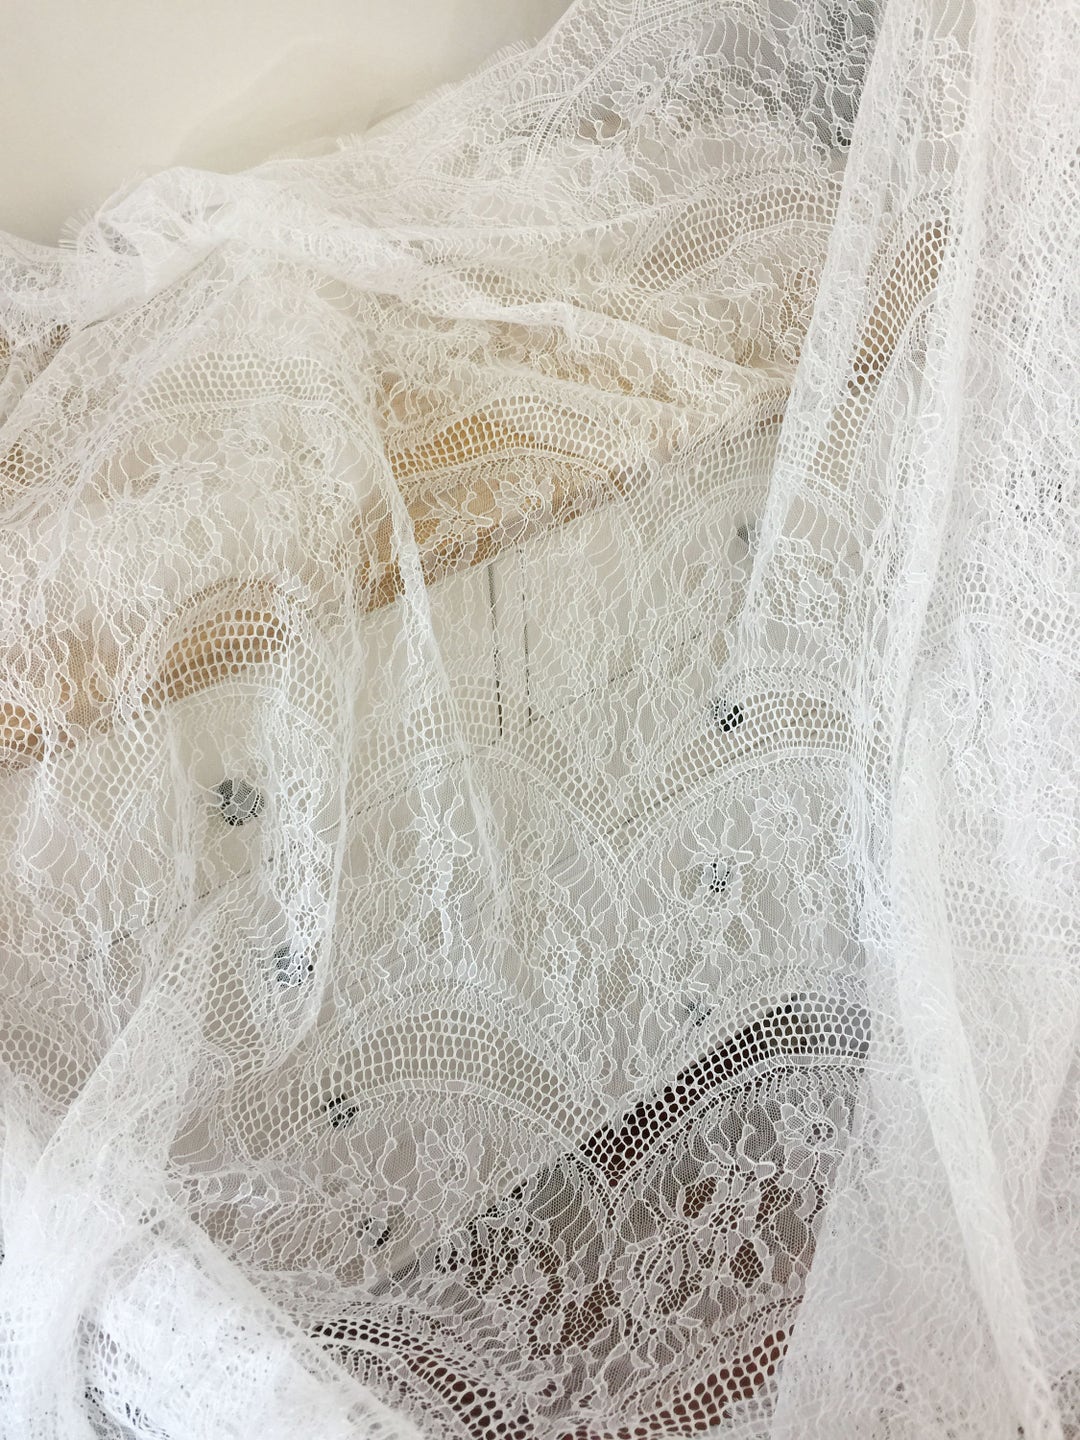 3 METER PIECE Bridal Chantilly Lace Fabric Lingerie Lace - Etsy